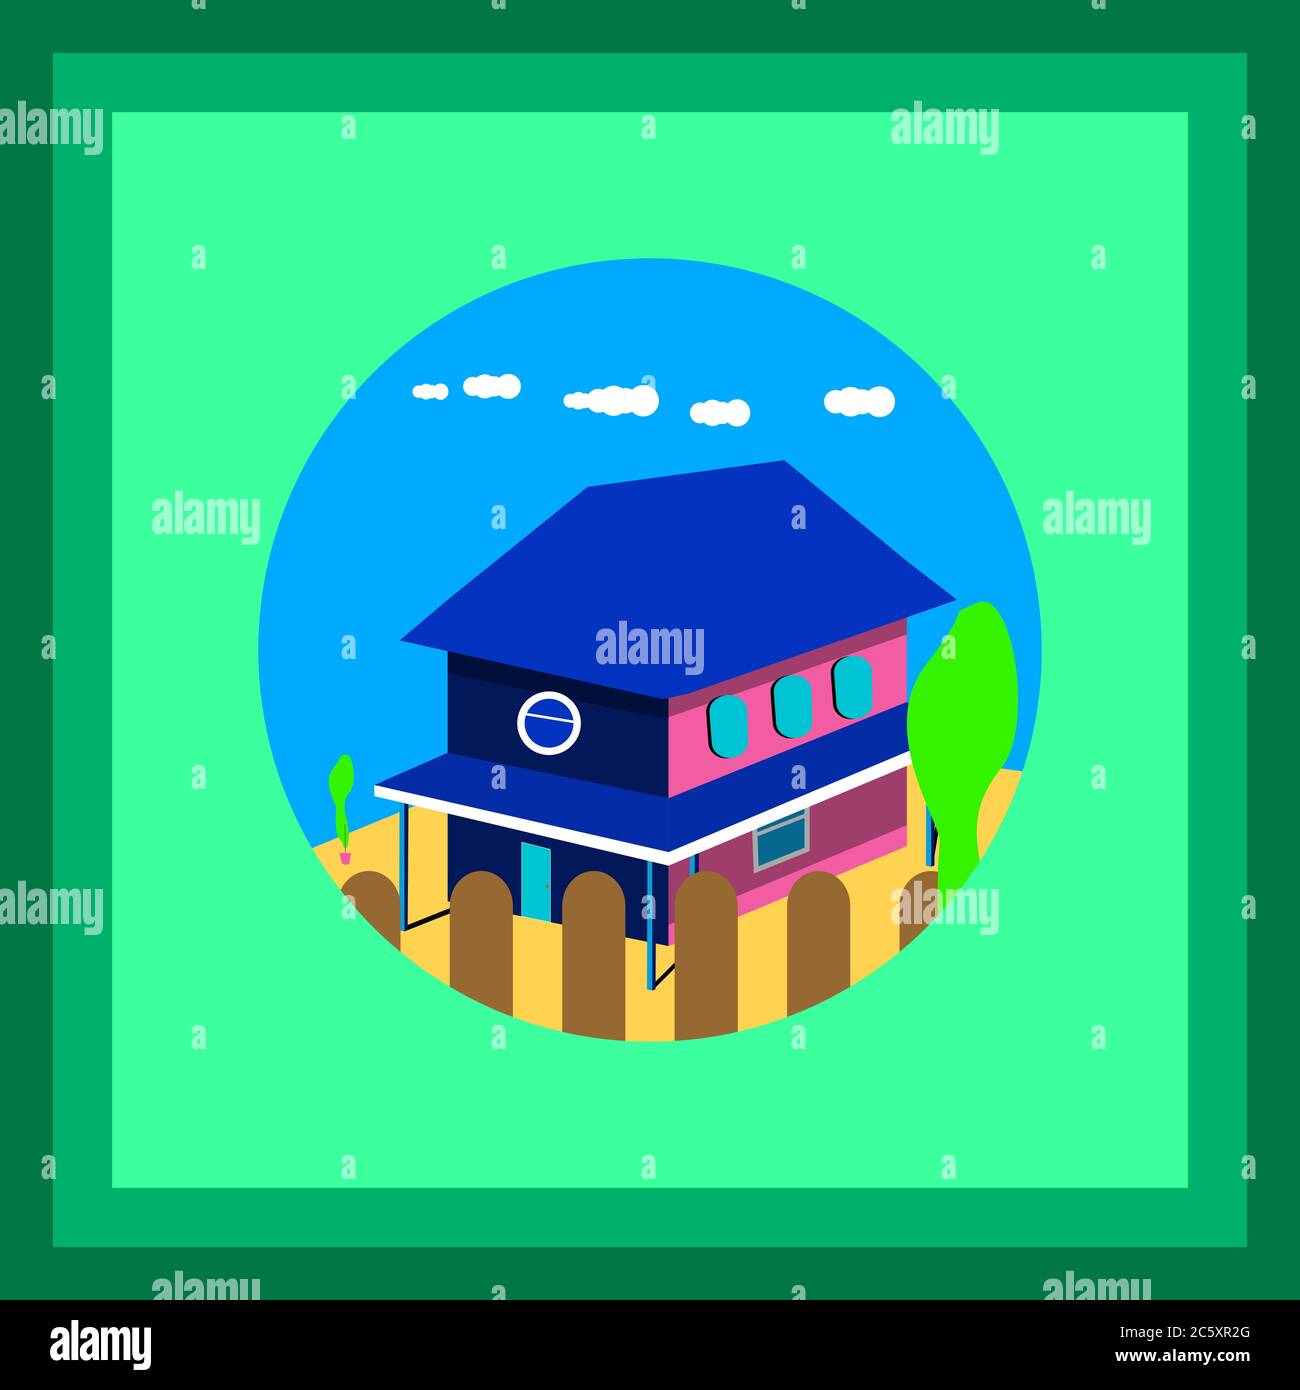 Vector illustrations of house, fence, cloud and tree in the middle of the circle on green background. Stock Vector